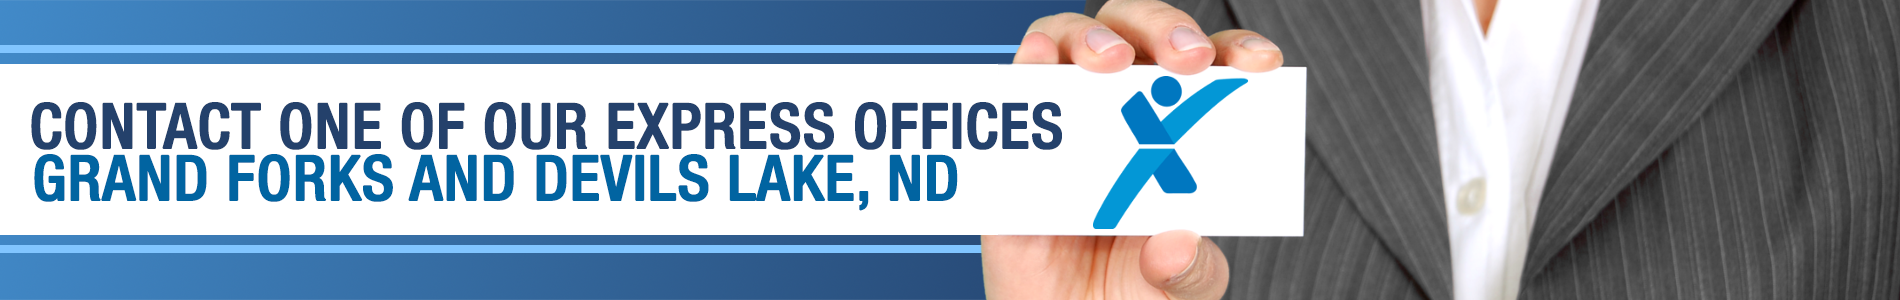 Contact one of our staffing agencies in Grand Forks, ND and Devils Lake, ND